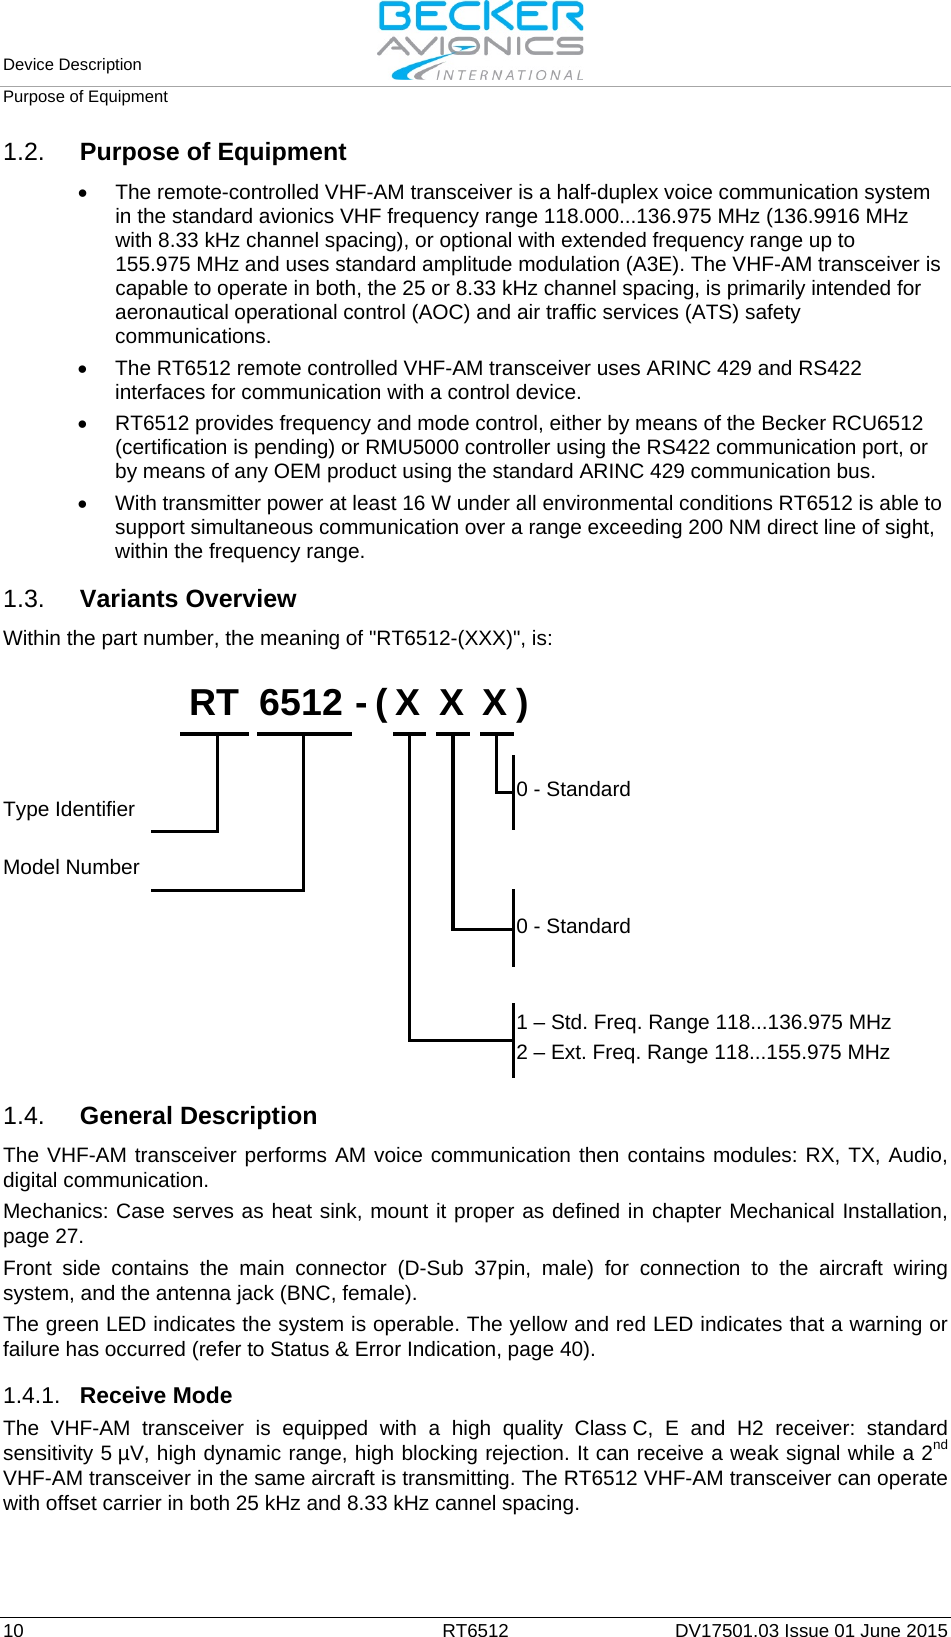 Device Description   Purpose of Equipment  10  RT6512 DV17501.03 Issue 01 June 2015 1.2. Purpose of Equipment • The remote-controlled VHF-AM transceiver is a half-duplex voice communication system in the standard avionics VHF frequency range 118.000...136.975 MHz (136.9916 MHz with 8.33 kHz channel spacing), or optional with extended frequency range up to 155.975 MHz and uses standard amplitude modulation (A3E). The VHF-AM transceiver is capable to operate in both, the 25 or 8.33 kHz channel spacing, is primarily intended for aeronautical operational control (AOC) and air traffic services (ATS) safety communications. • The RT6512 remote controlled VHF-AM transceiver uses ARINC 429 and RS422 interfaces for communication with a control device. • RT6512 provides frequency and mode control, either by means of the Becker RCU6512 (certification is pending) or RMU5000 controller using the RS422 communication port, or by means of any OEM product using the standard ARINC 429 communication bus. • With transmitter power at least 16 W under all environmental conditions RT6512 is able to support simultaneous communication over a range exceeding 200 NM direct line of sight, within the frequency range.  1.3. Variants Overview Within the part number, the meaning of &quot;RT6512-(XXX)&quot;, is:    RT  6512 - ( X  X  X )                   Type Identifier                       0 - Standard  Model Number                                          0 - Standard                                                          1 – Std. Freq. Range 118...136.975 MHz 2 – Ext. Freq. Range 118...155.975 MHz          1.4. General Description The VHF-AM transceiver performs AM voice communication then contains modules: RX, TX, Audio, digital communication. Mechanics: Case serves as heat sink, mount it proper as defined in chapter Mechanical Installation, page 27. Front  side contains the main connector (D-Sub  37pin,  male) for connection to the aircraft wiring system, and the antenna jack (BNC, female). The green LED indicates the system is operable. The yellow and red LED indicates that a warning or failure has occurred (refer to Status &amp; Error Indication, page 40).  1.4.1. Receive Mode The  VHF-AM transceiver is equipped with  a  high  quality  Class C, E and H2 receiver: standard sensitivity 5 µV, high dynamic range, high blocking rejection. It can receive a weak signal while a 2nd VHF-AM transceiver in the same aircraft is transmitting. The RT6512 VHF-AM transceiver can operate with offset carrier in both 25 kHz and 8.33 kHz cannel spacing.  